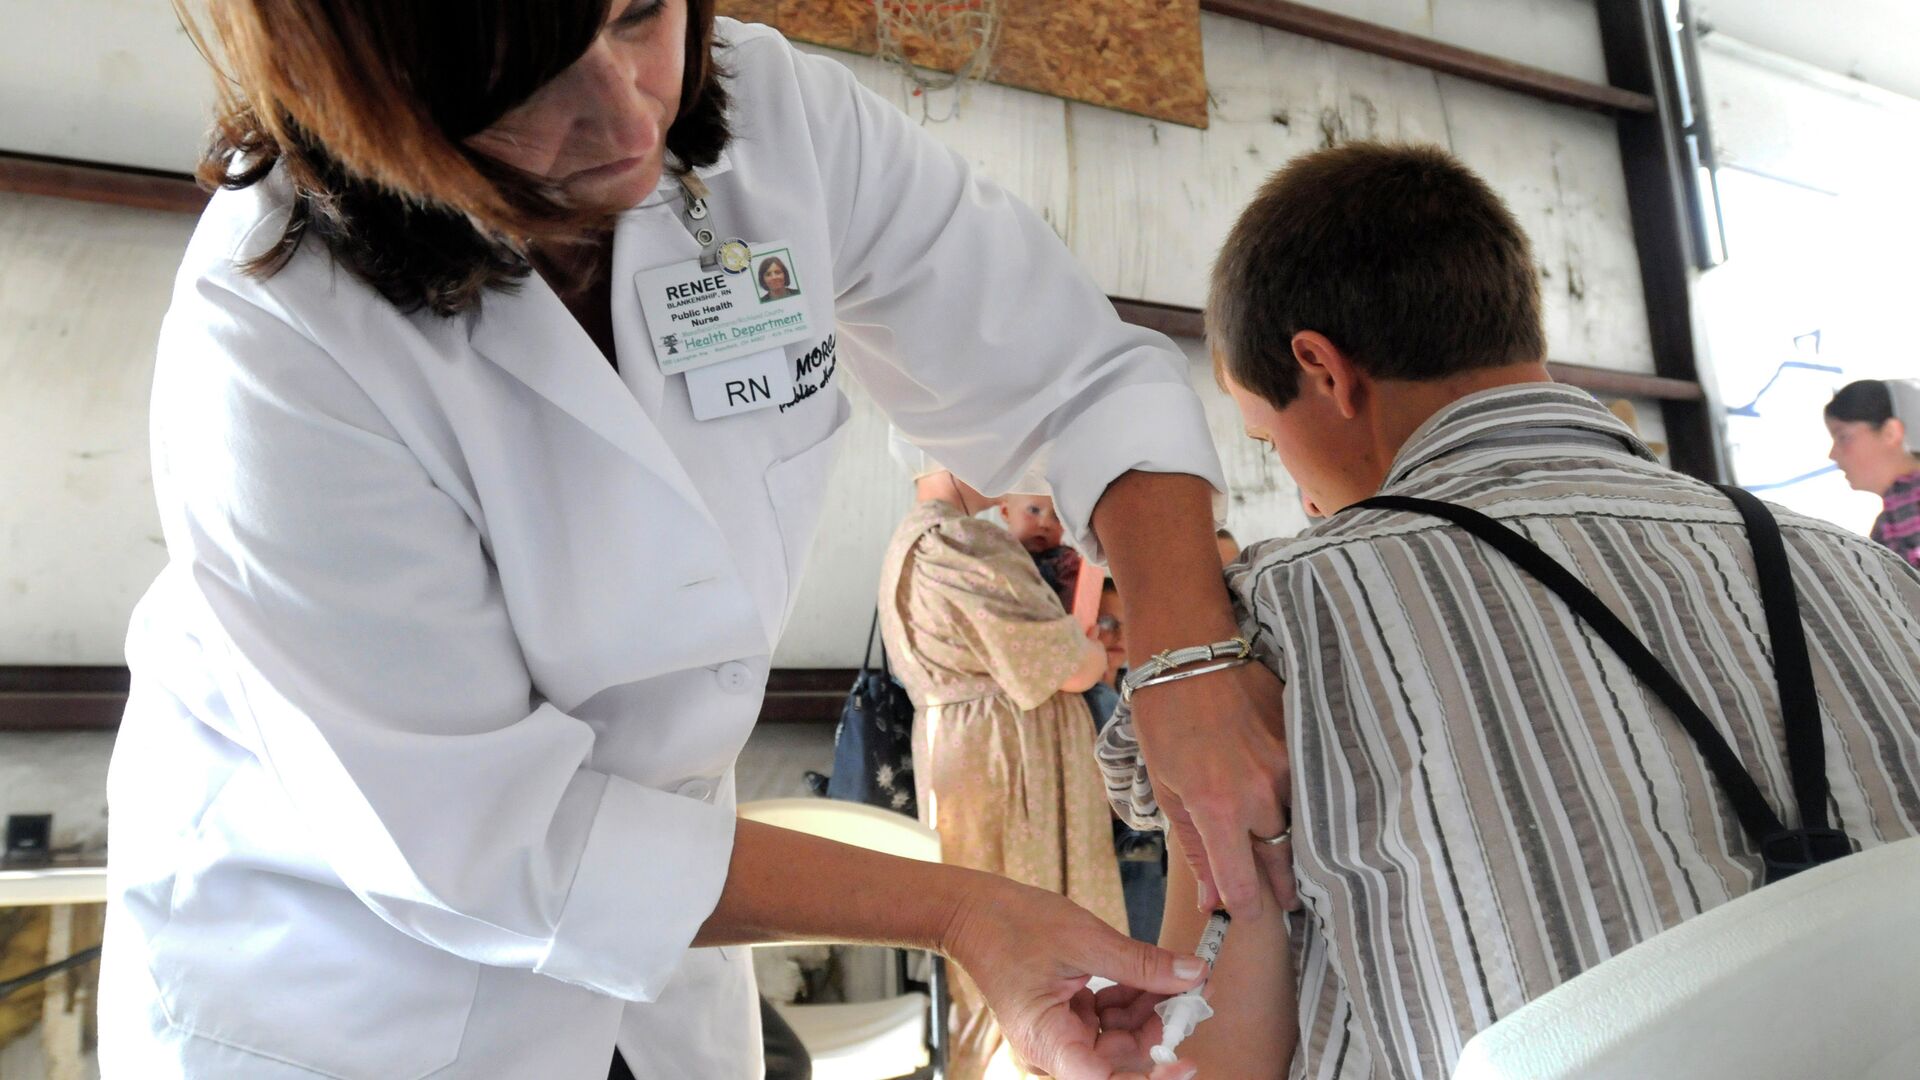 A health worker administers a measles vaccine in rural Ohio in 2014, where a measles outbreak of over 300 cases was the largest in the U.S. since 1994. - Sputnik Moldova-România, 1920, 28.06.2022